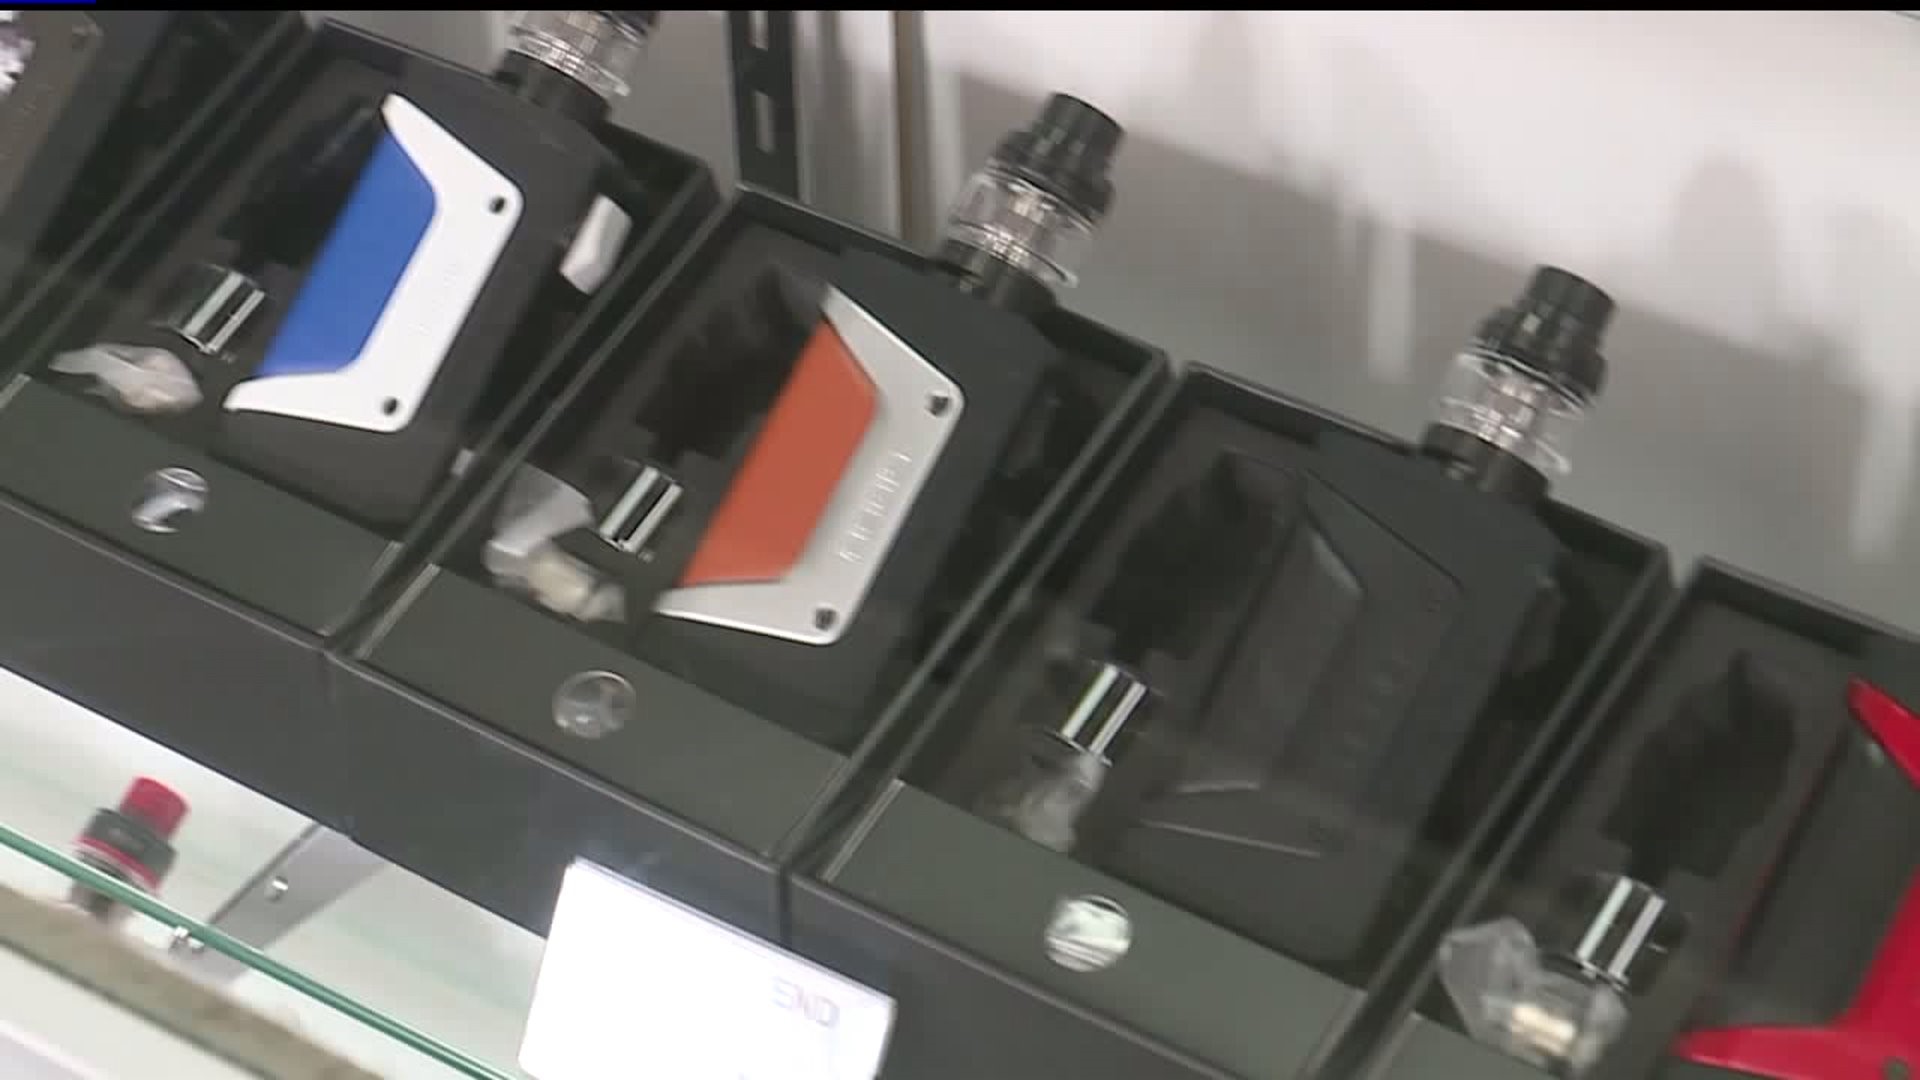 Pennsylvania Department of Health investigating potential vape-related illnesses